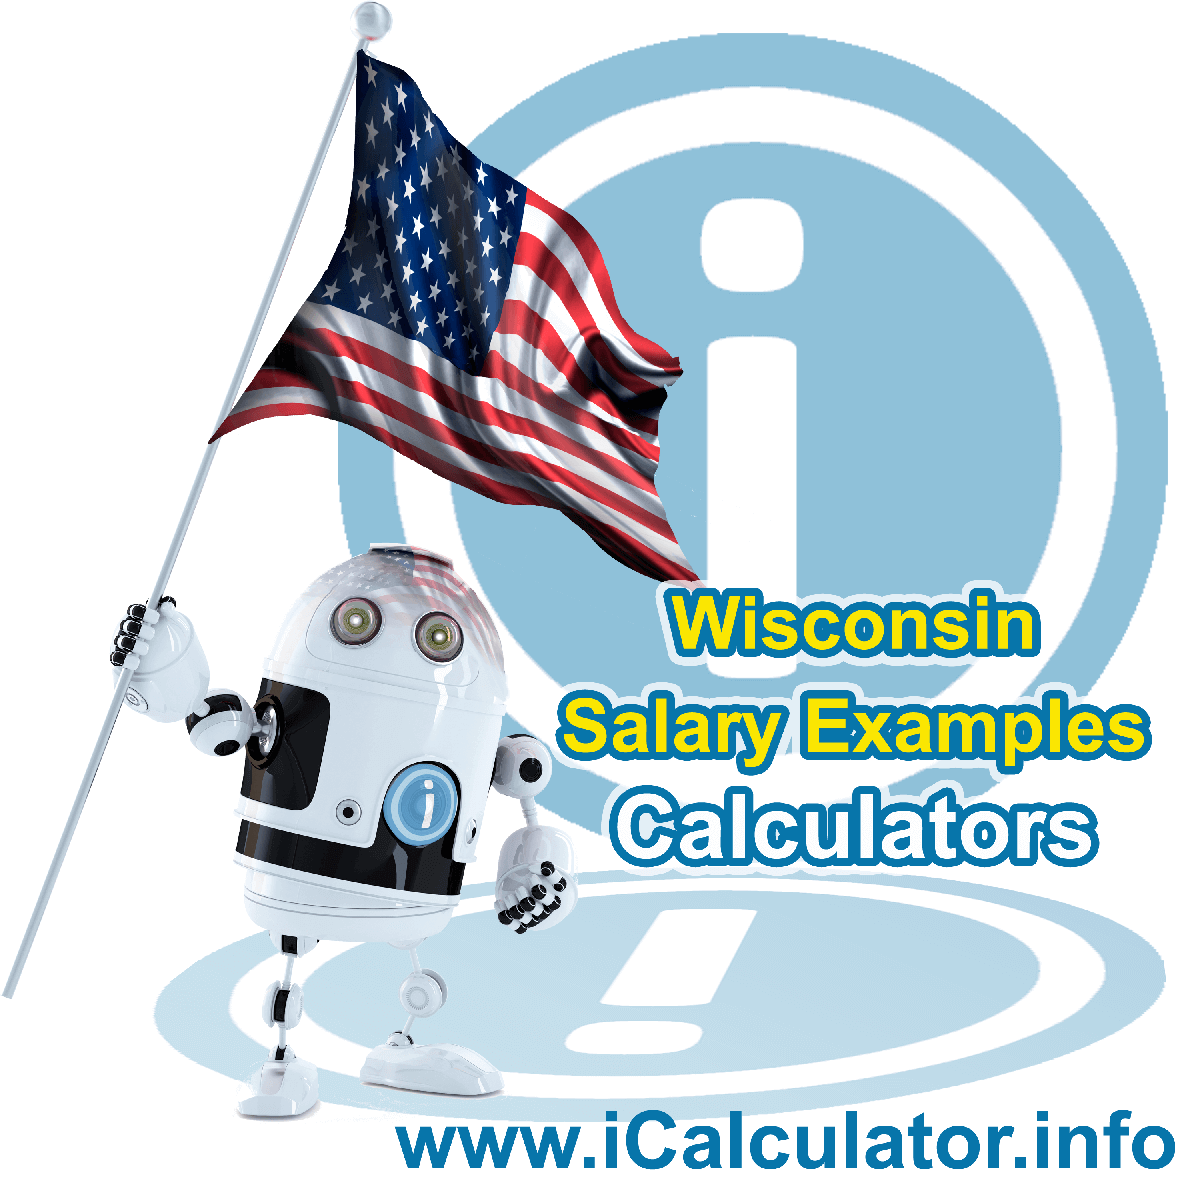 Wisconsin Salary Example for $ 280,000.00 in 2023 | iCalculator™ | $ 280,000.00 salary example for employee and employer paying Wisconsin State tincome taxes. Detailed salary after tax calculation including Wisconsin State Tax, Federal State Tax, Medicare Deductions, Social Security, Capital Gains and other income tax and salary deductions complete with supporting Wisconsin state tax tables 